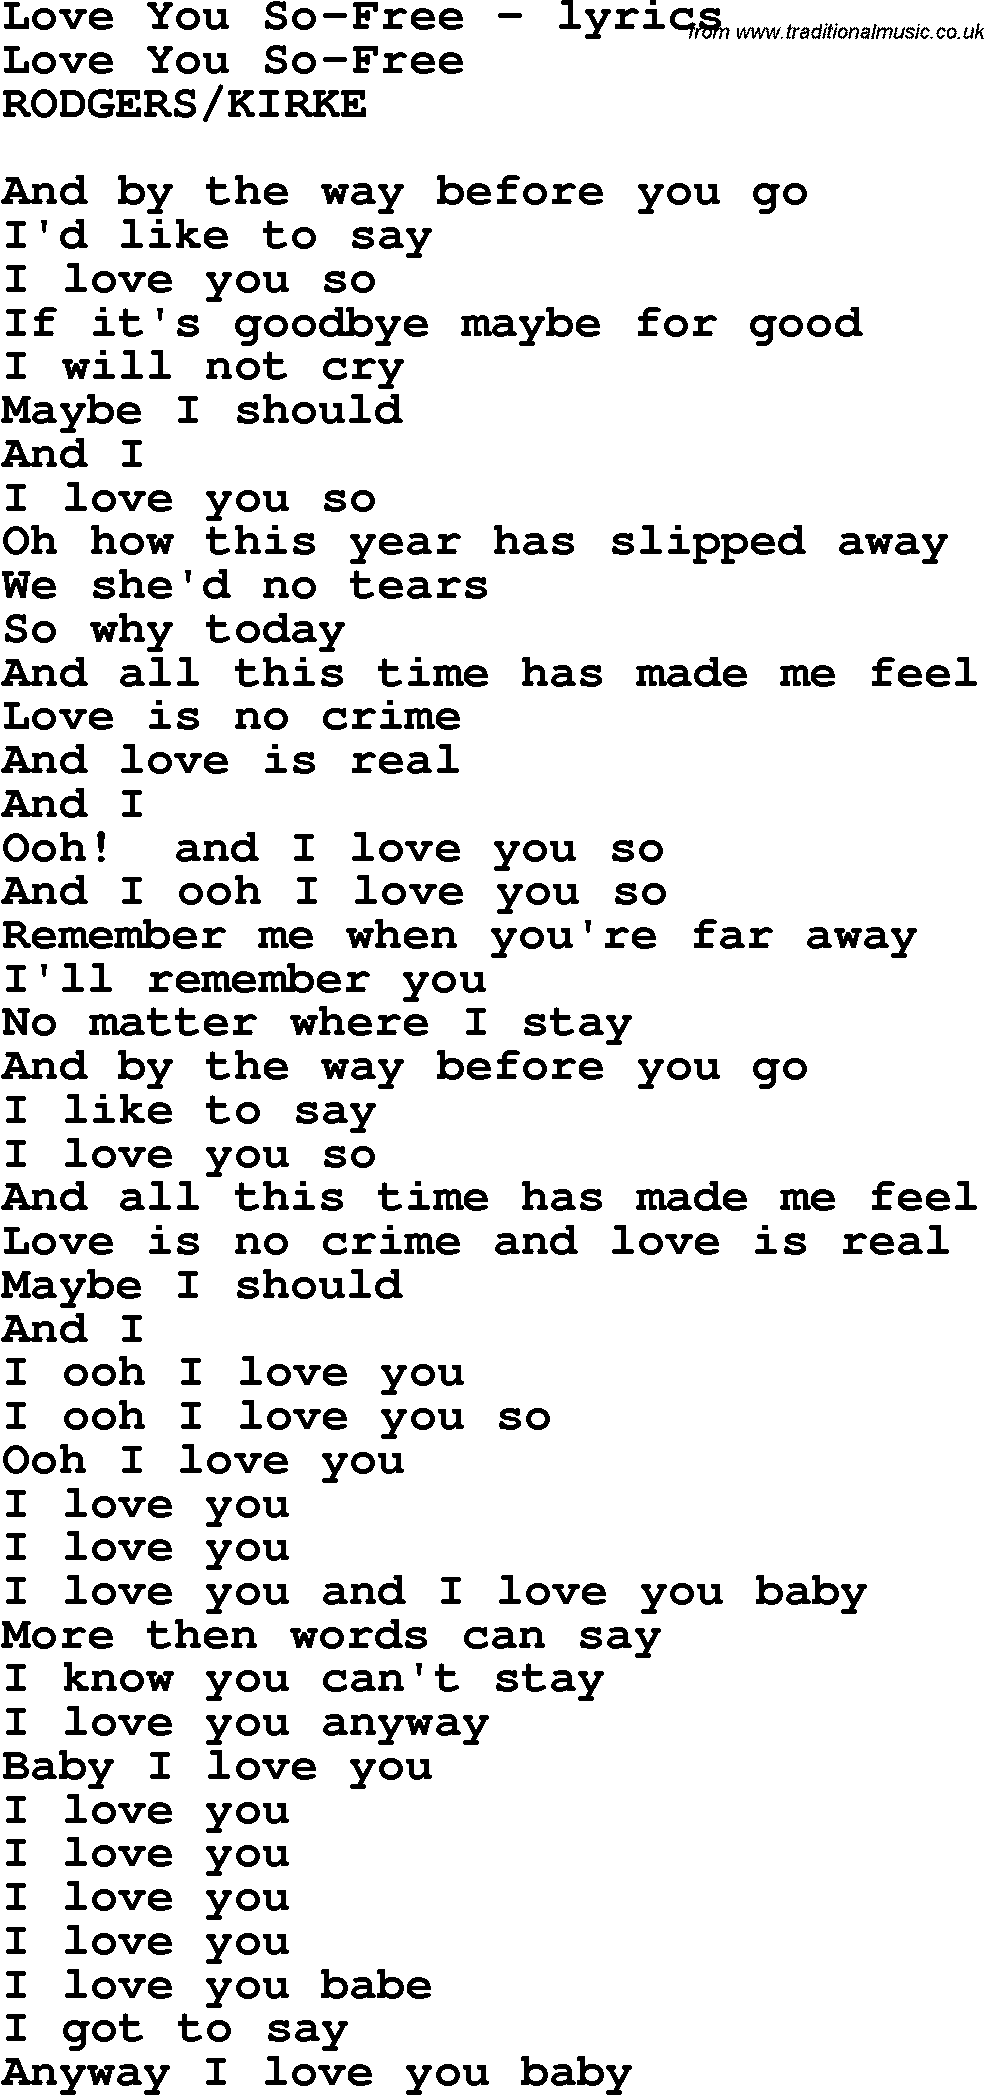 Love Song Lyrics for: Love You So-Free